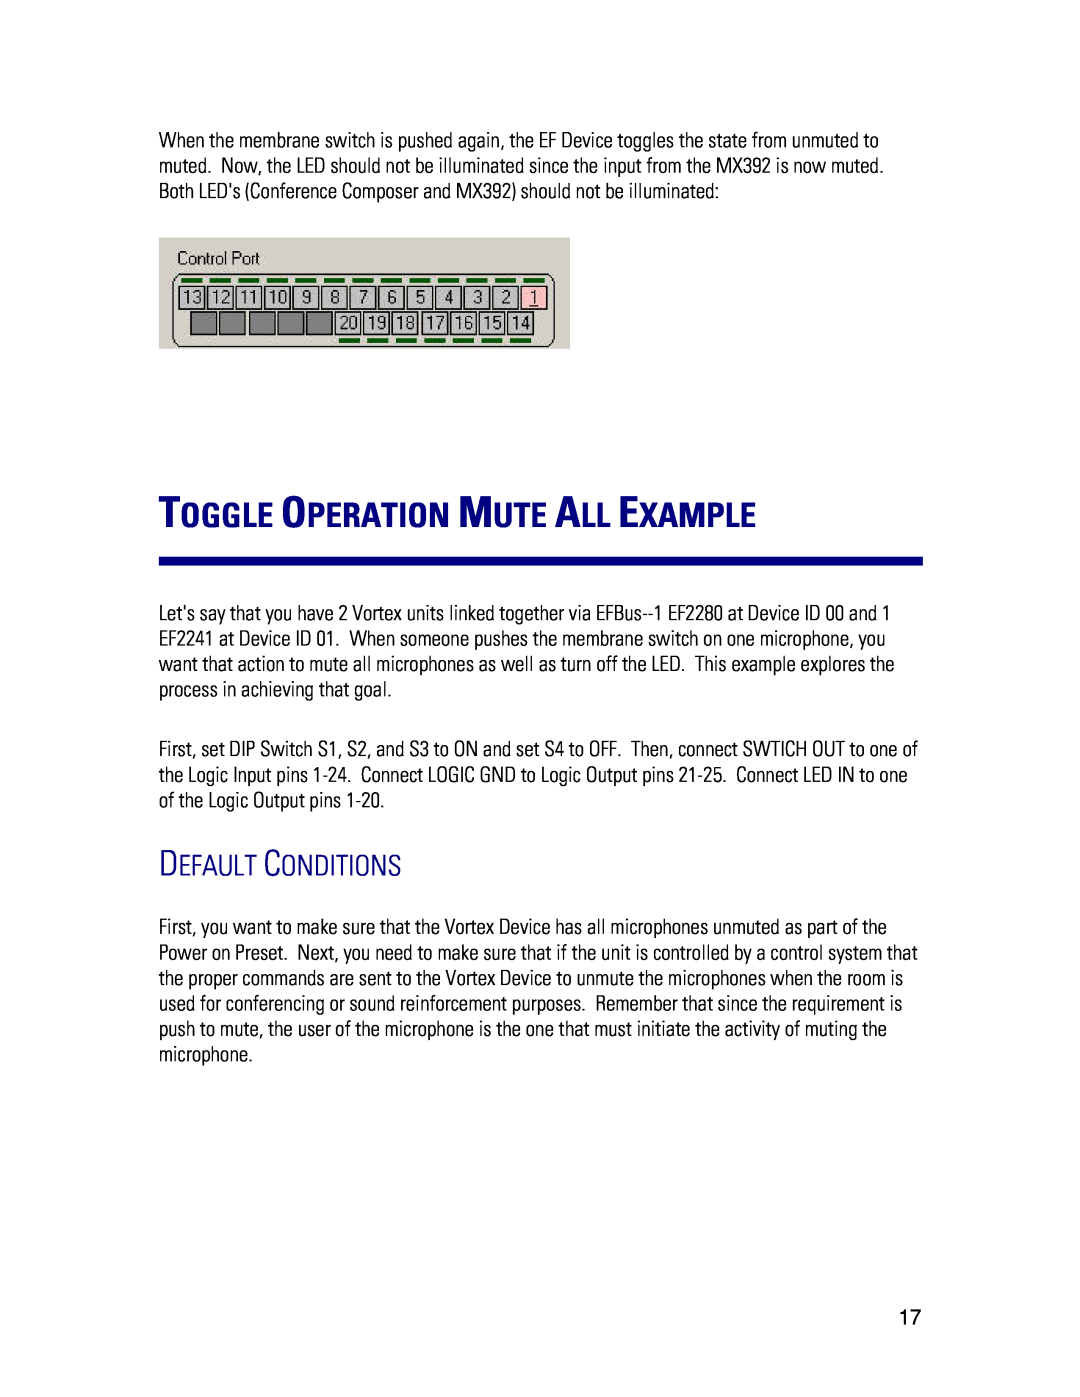 Polycom MX392 manual Toggle Operation Mute All Example, Default Conditions 